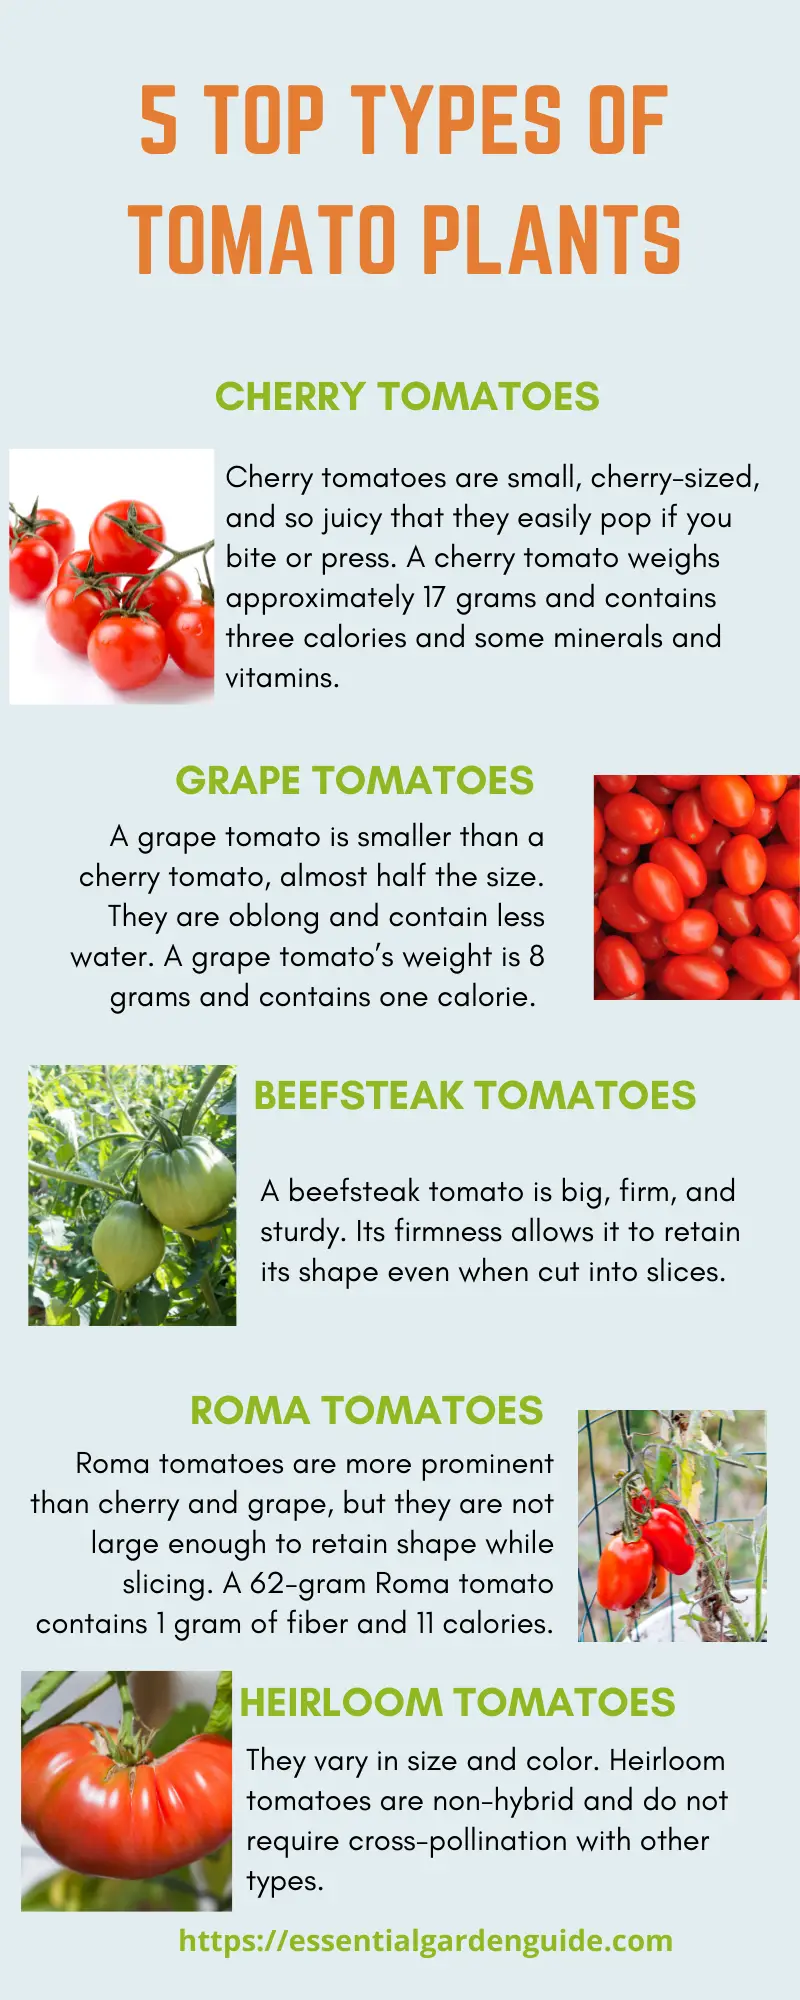 What are the most common types of tomato plants?